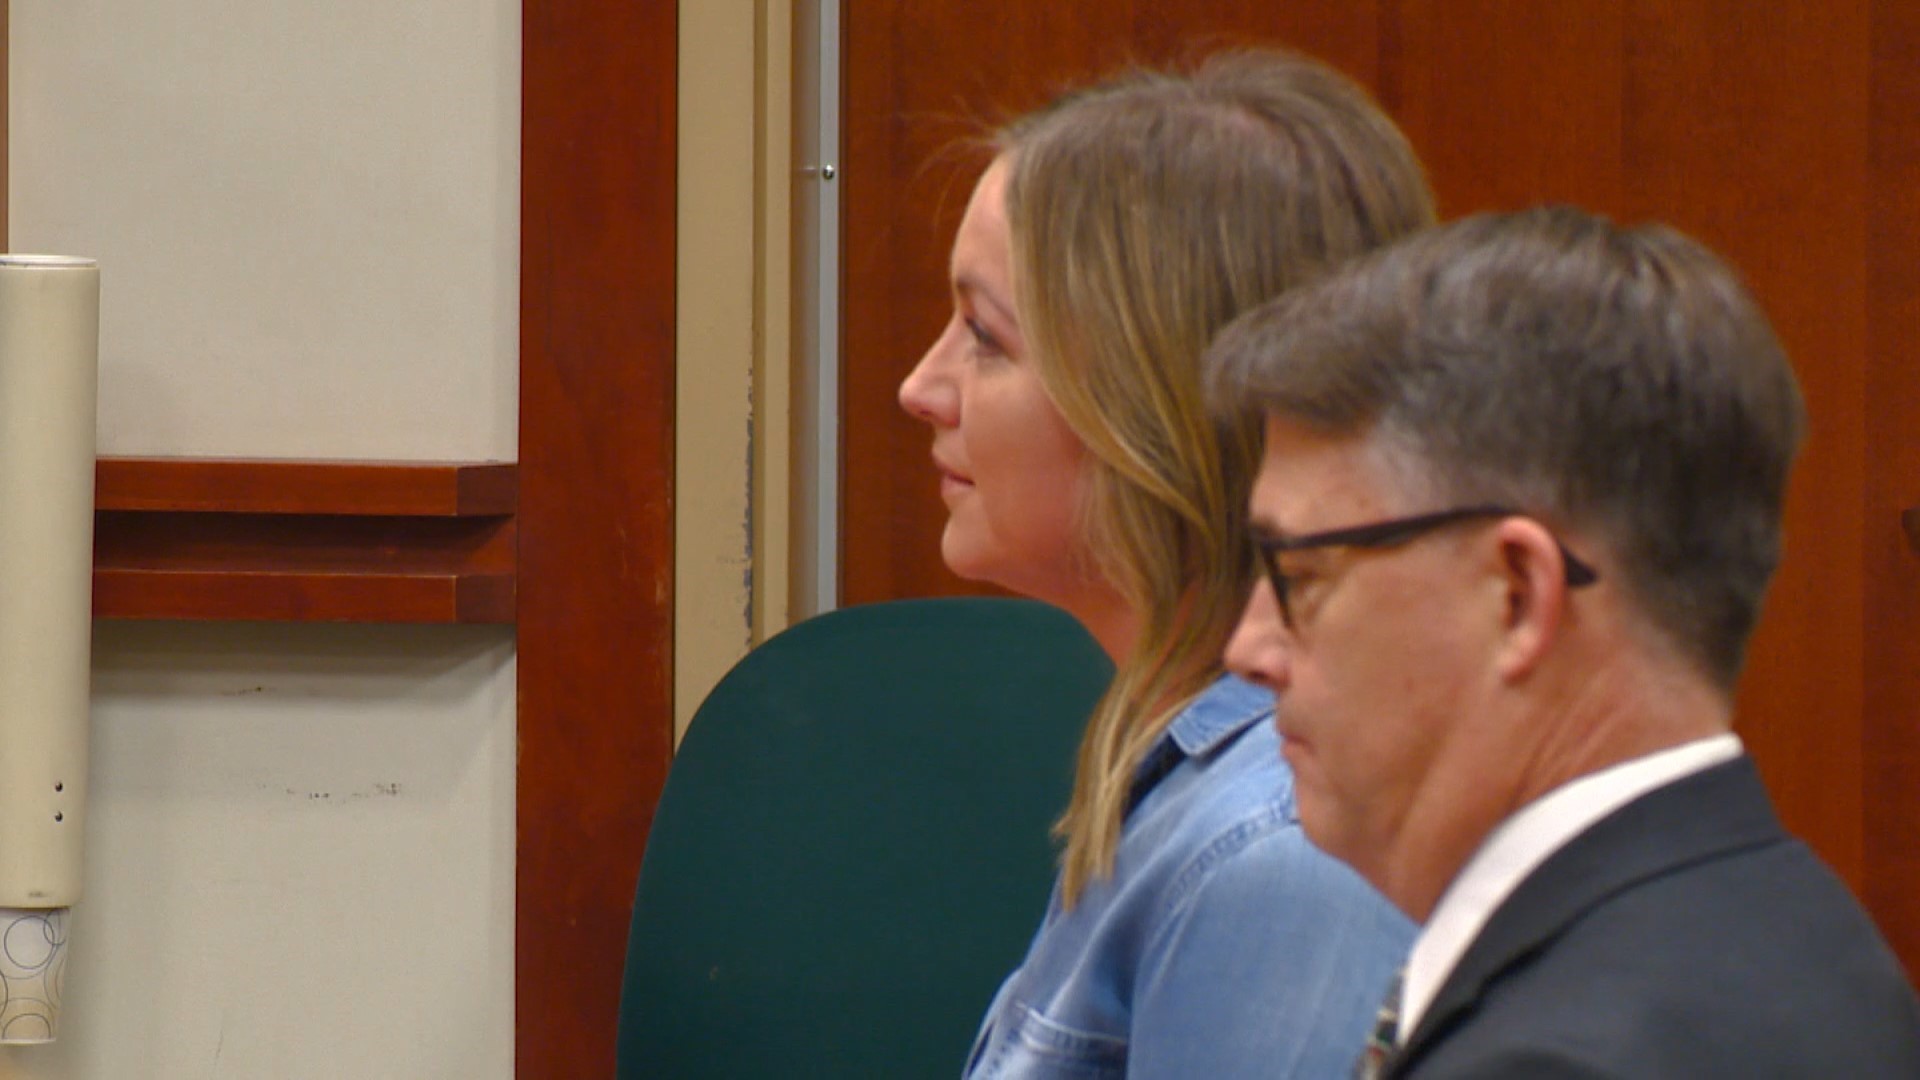 Natalie Hodson pleaded not guilty Thursday to felony vehicular manslaughter and hit-and-run charges related to the crash that killed Kristina Rowley.